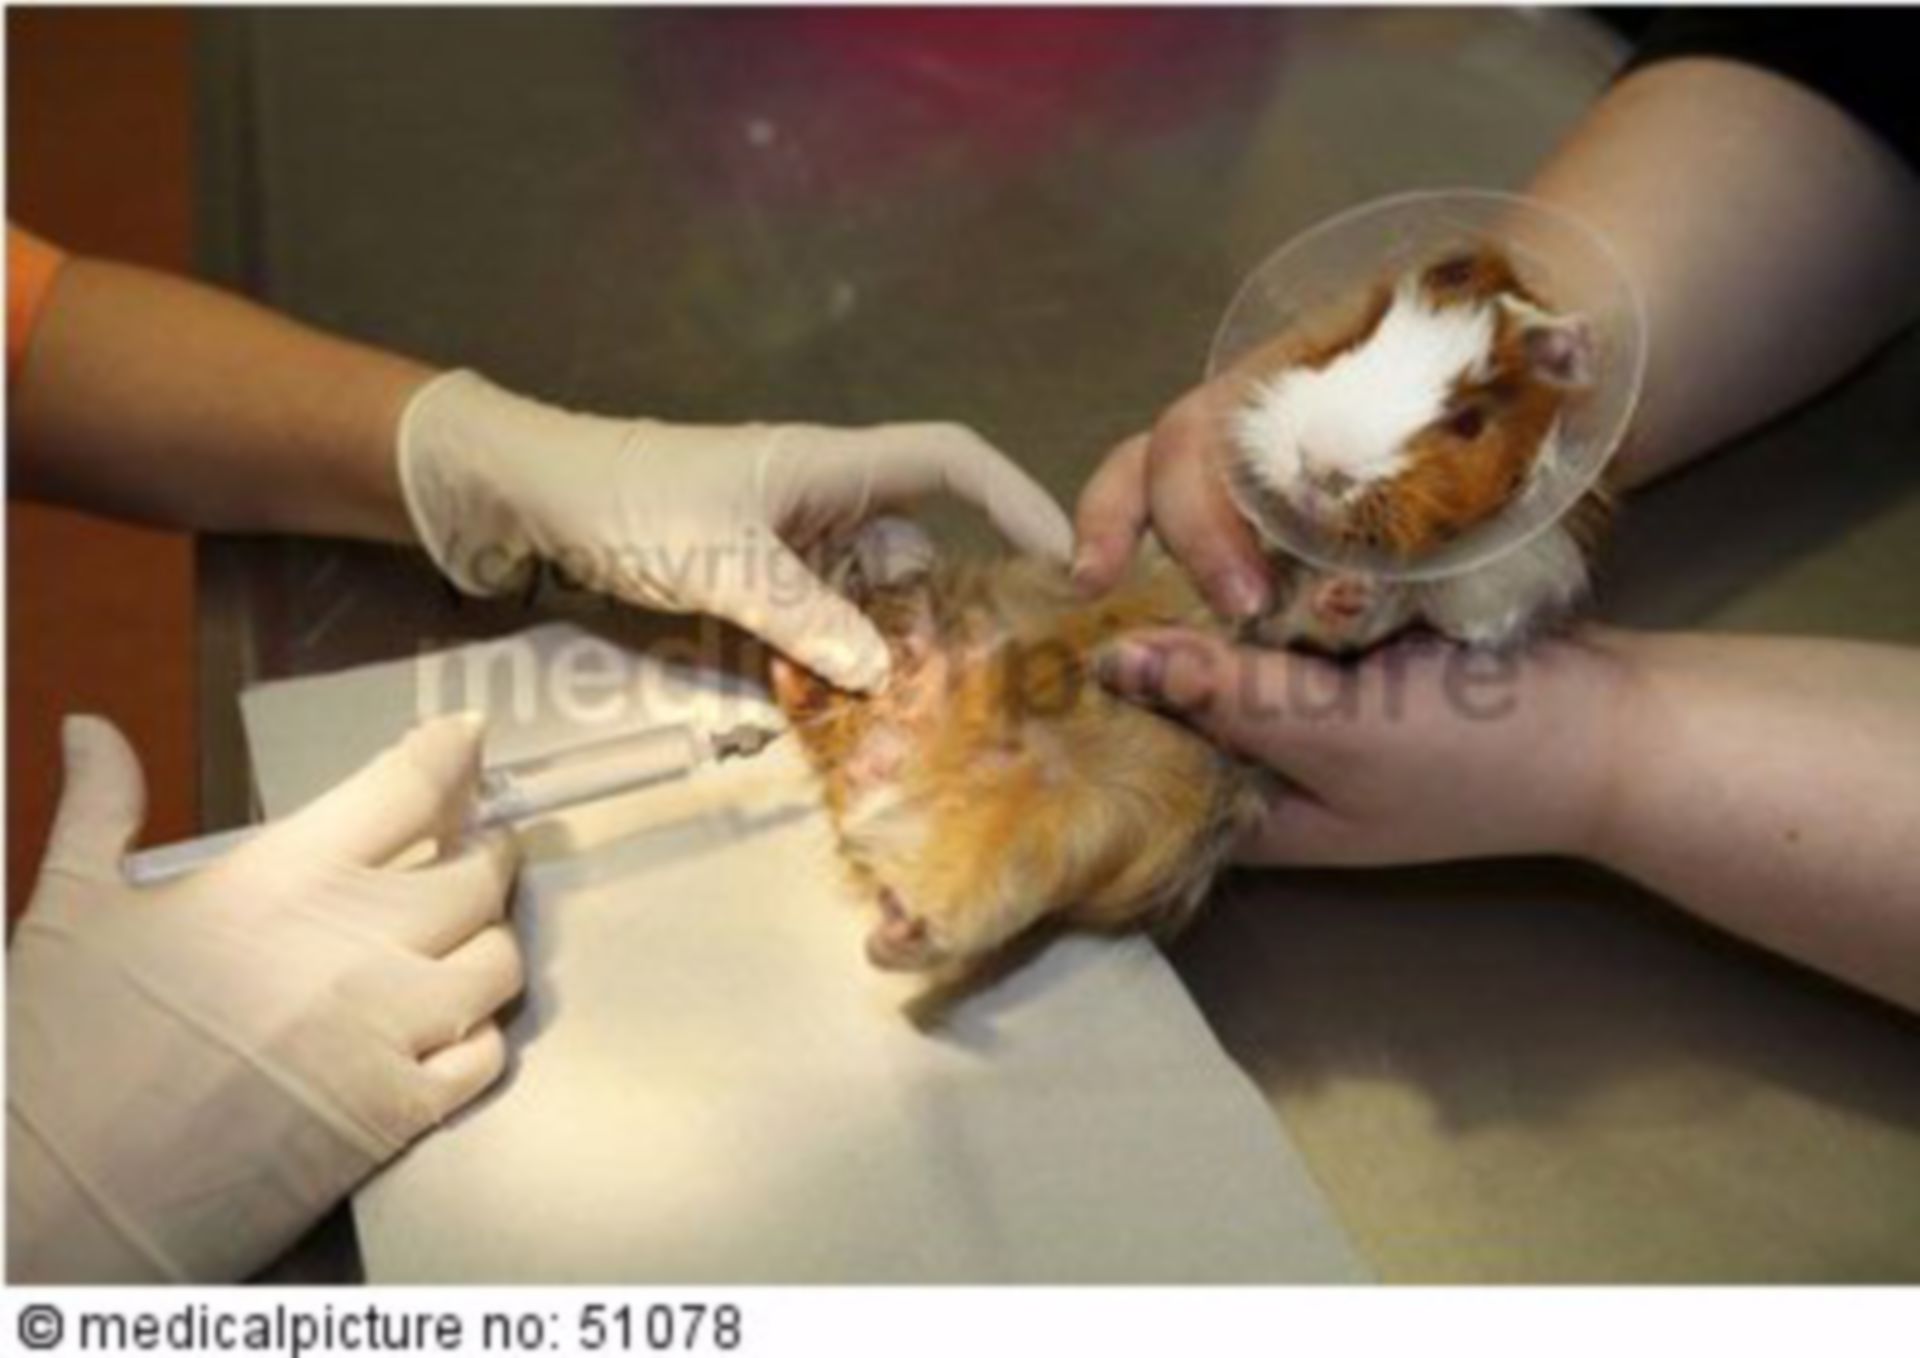 Veterinary practice wound lavage